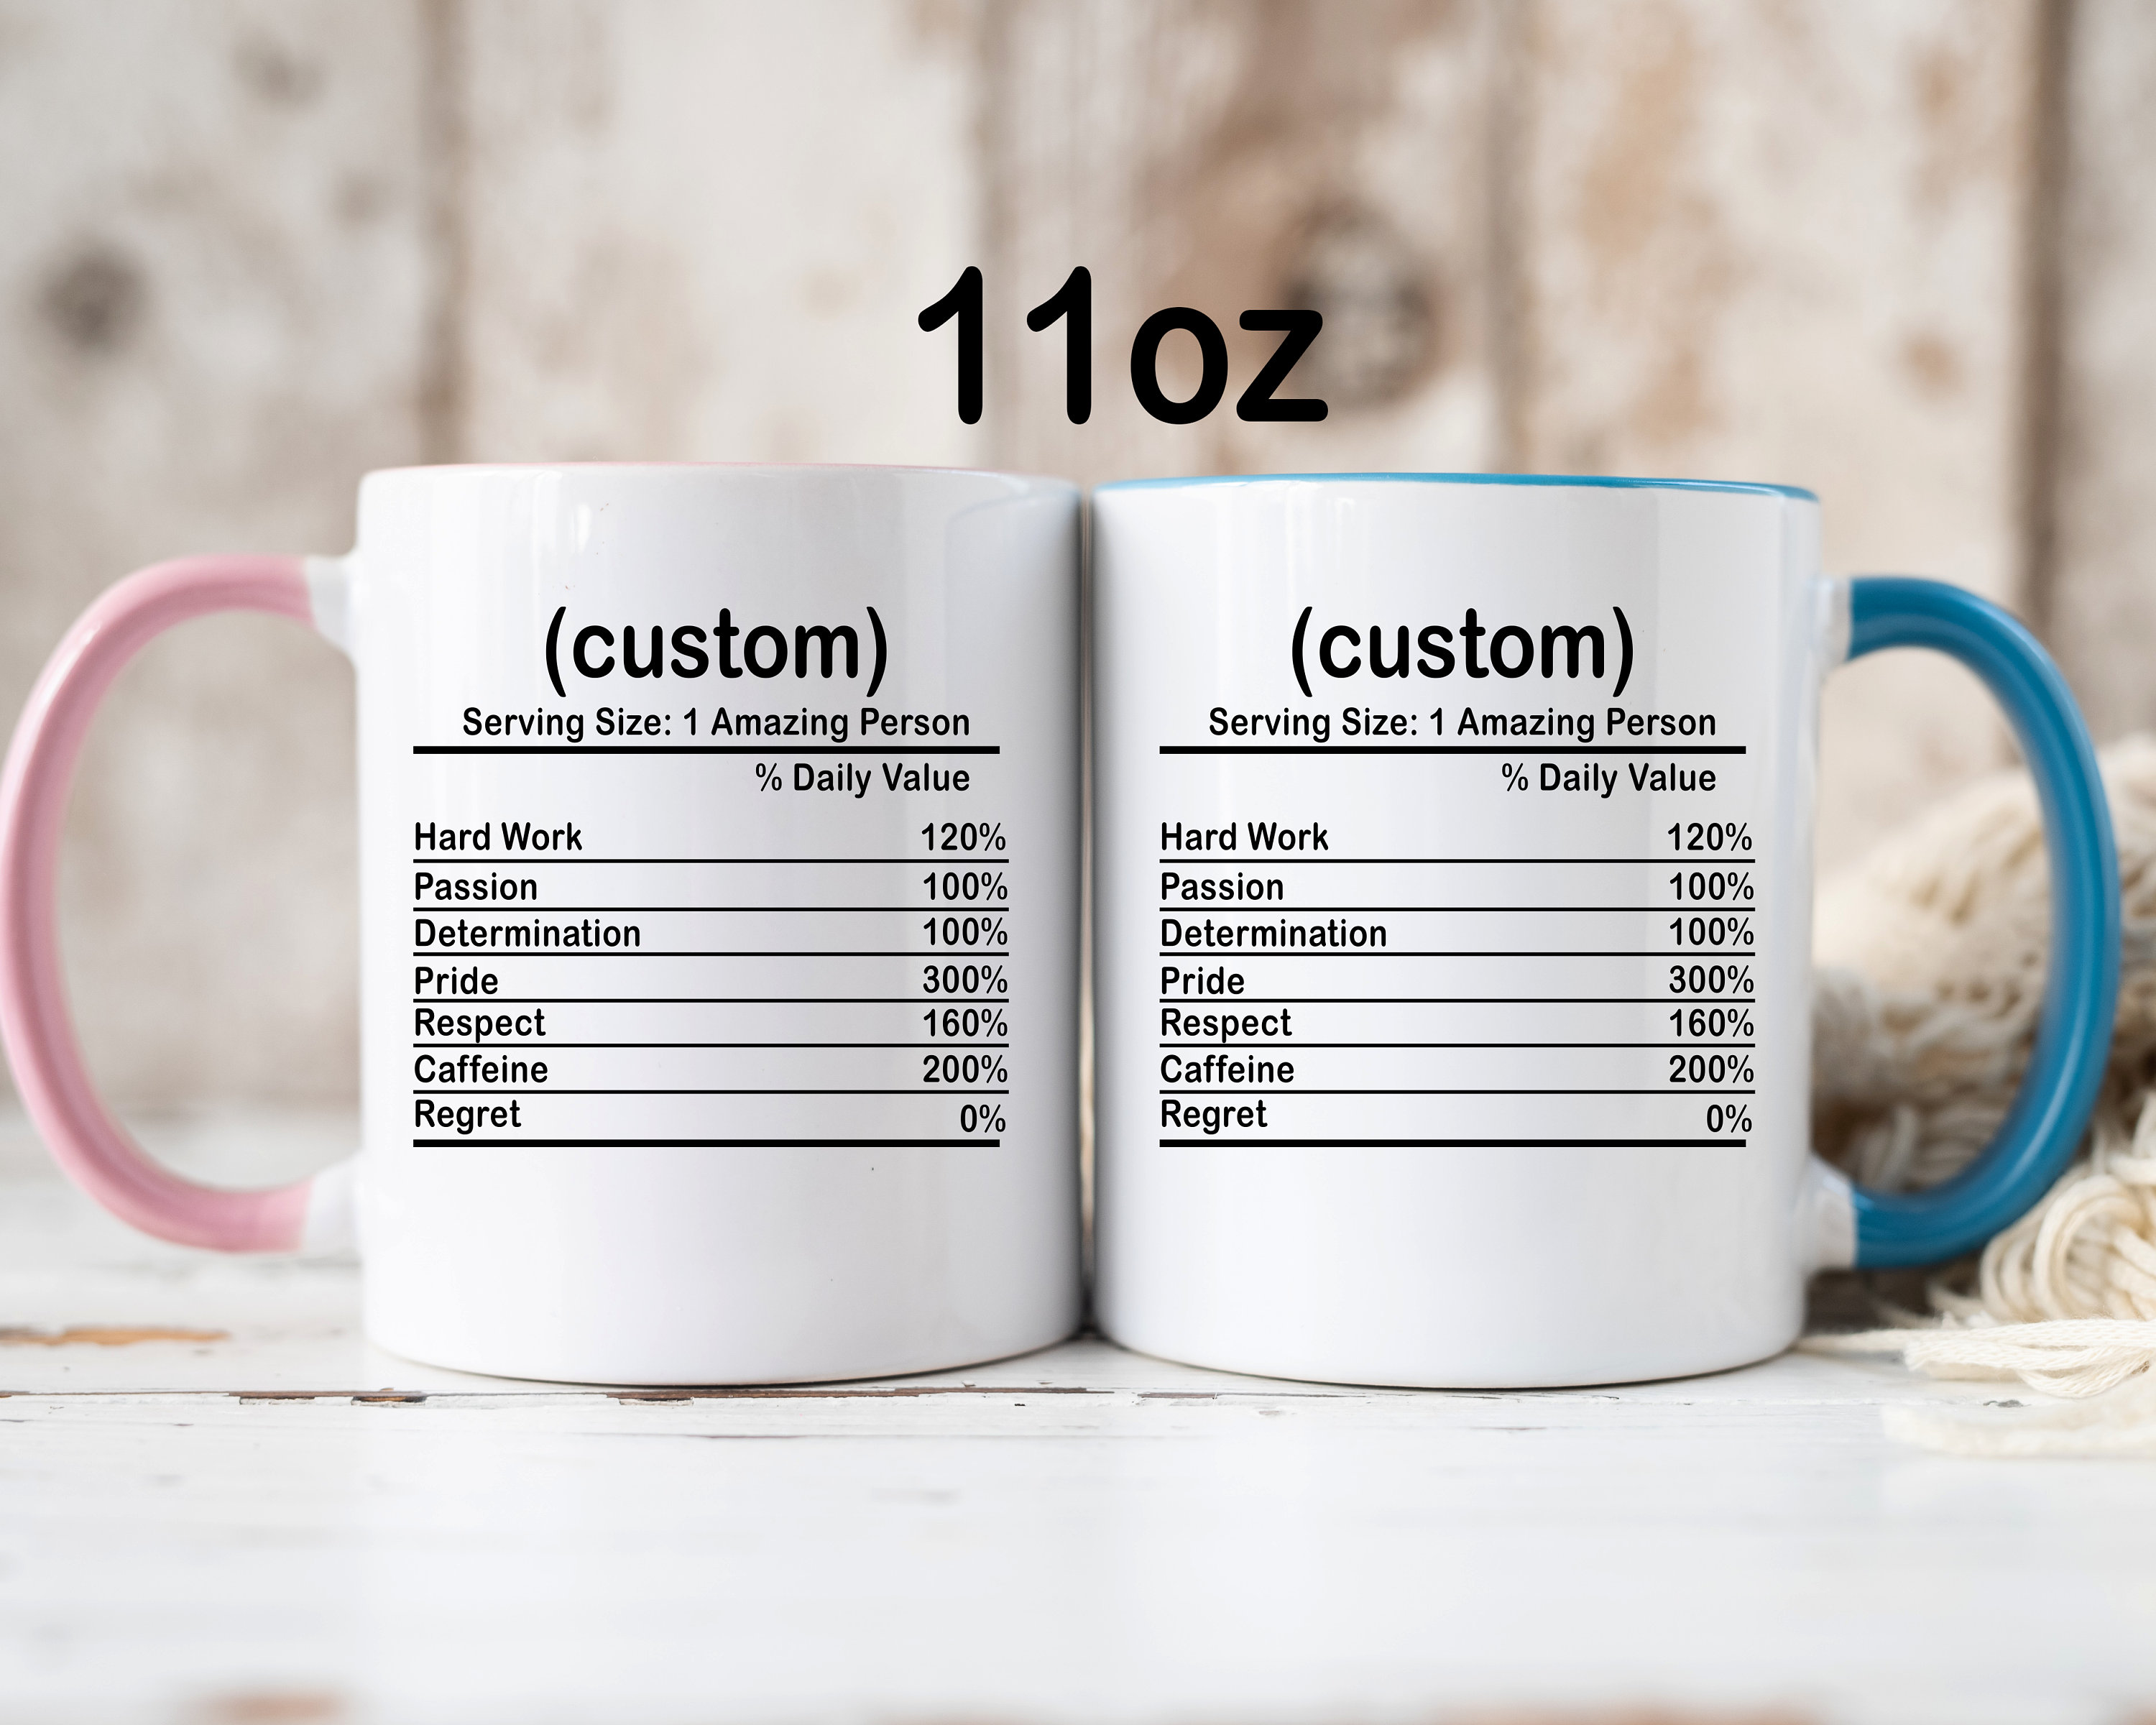 Personalized Cashier Nutrition Facts Mug, Cashier Gift, Nutrition Facts  Custom Mug, Best Cashier Gift, Cashier Cup, Cashier Gag, Cashiers -   Sweden